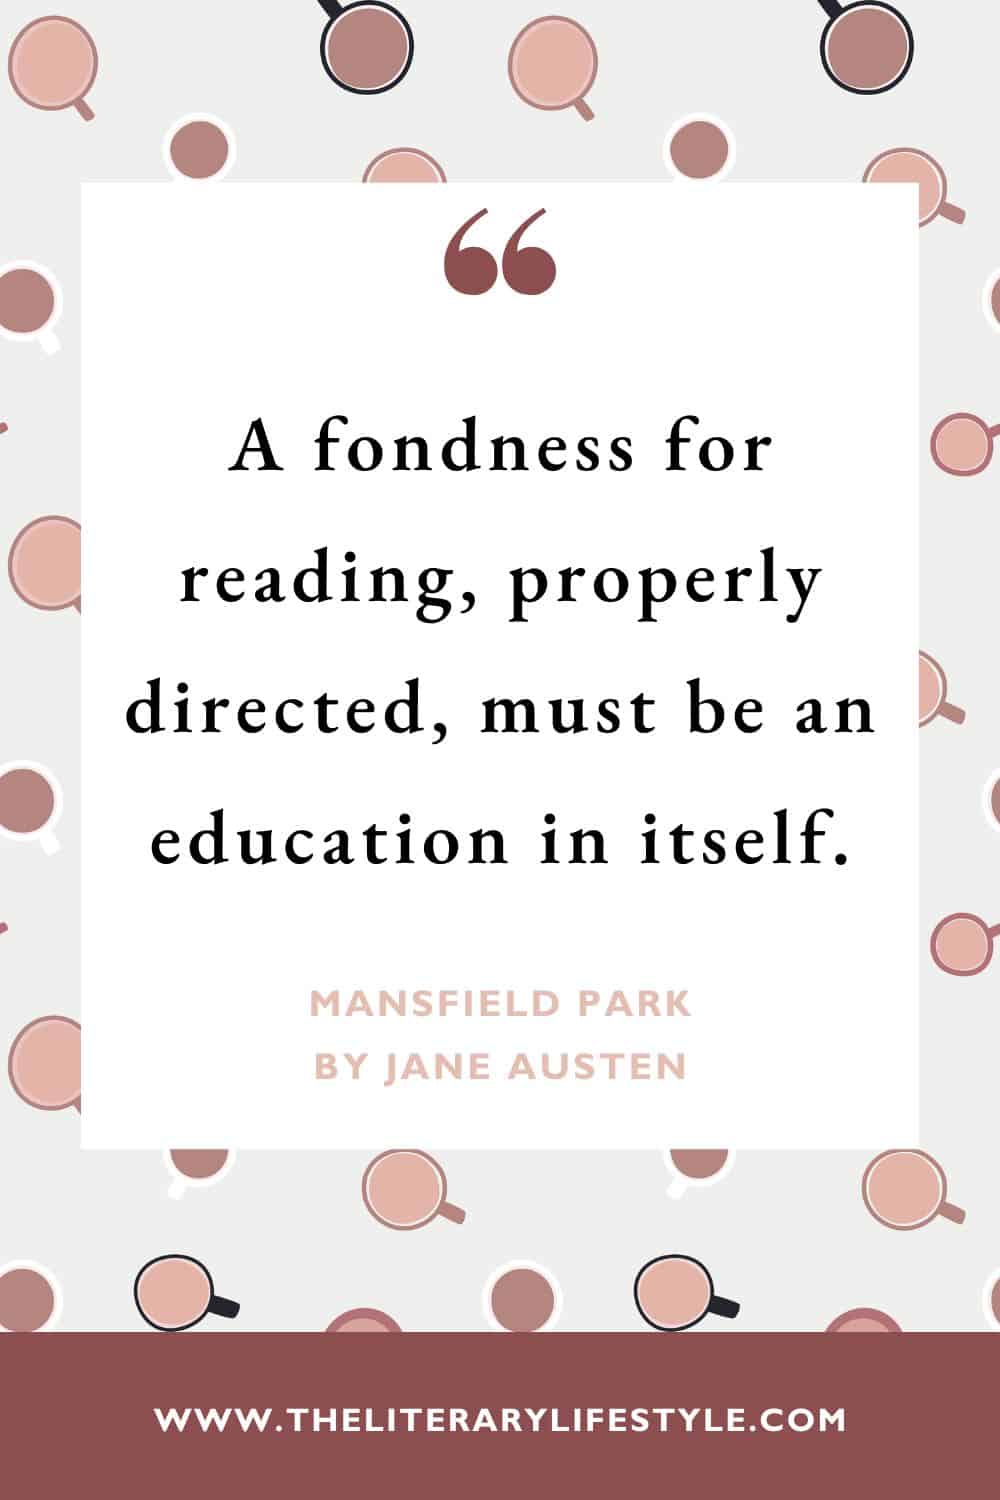 a fondness for reading, properly directed, must be an education itself.